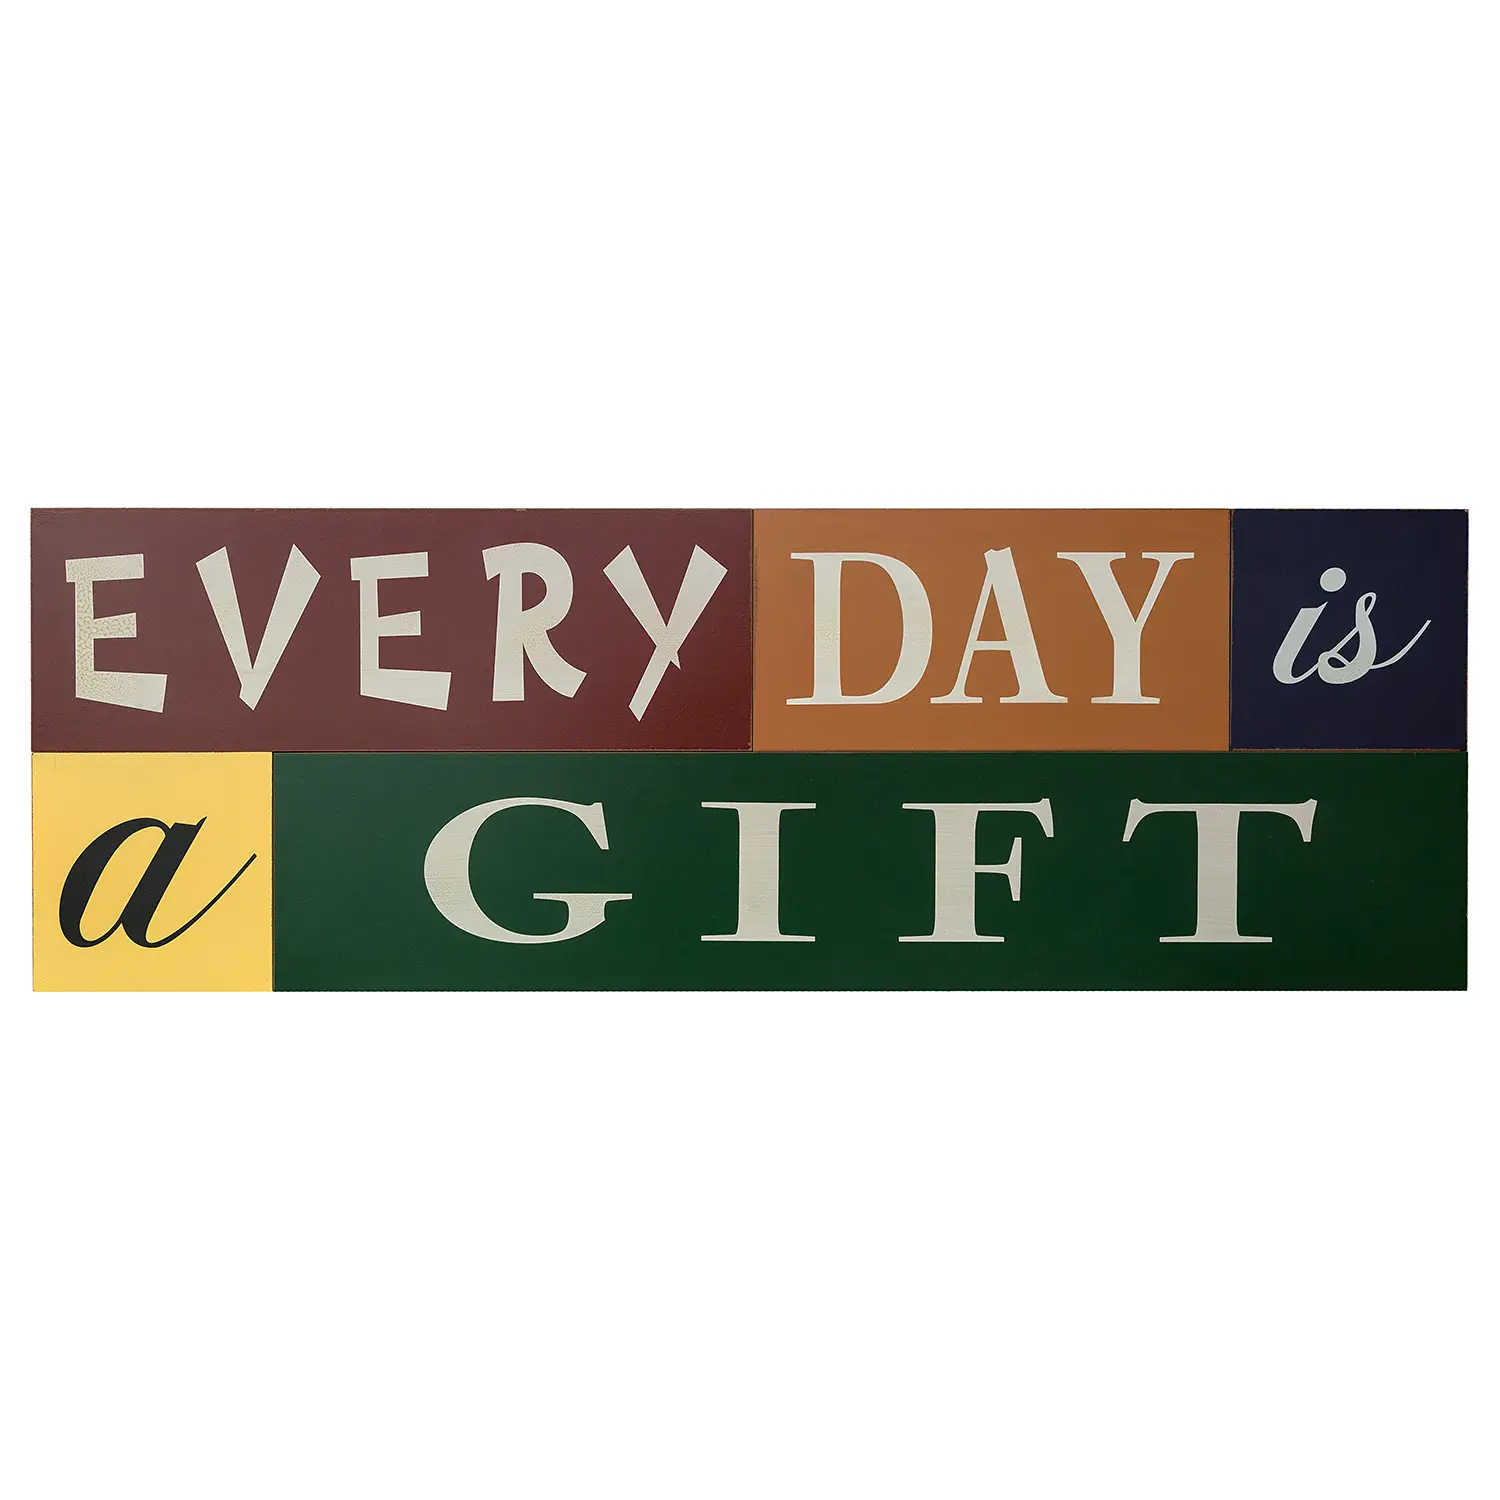 gift a Every is Spruchtafel day